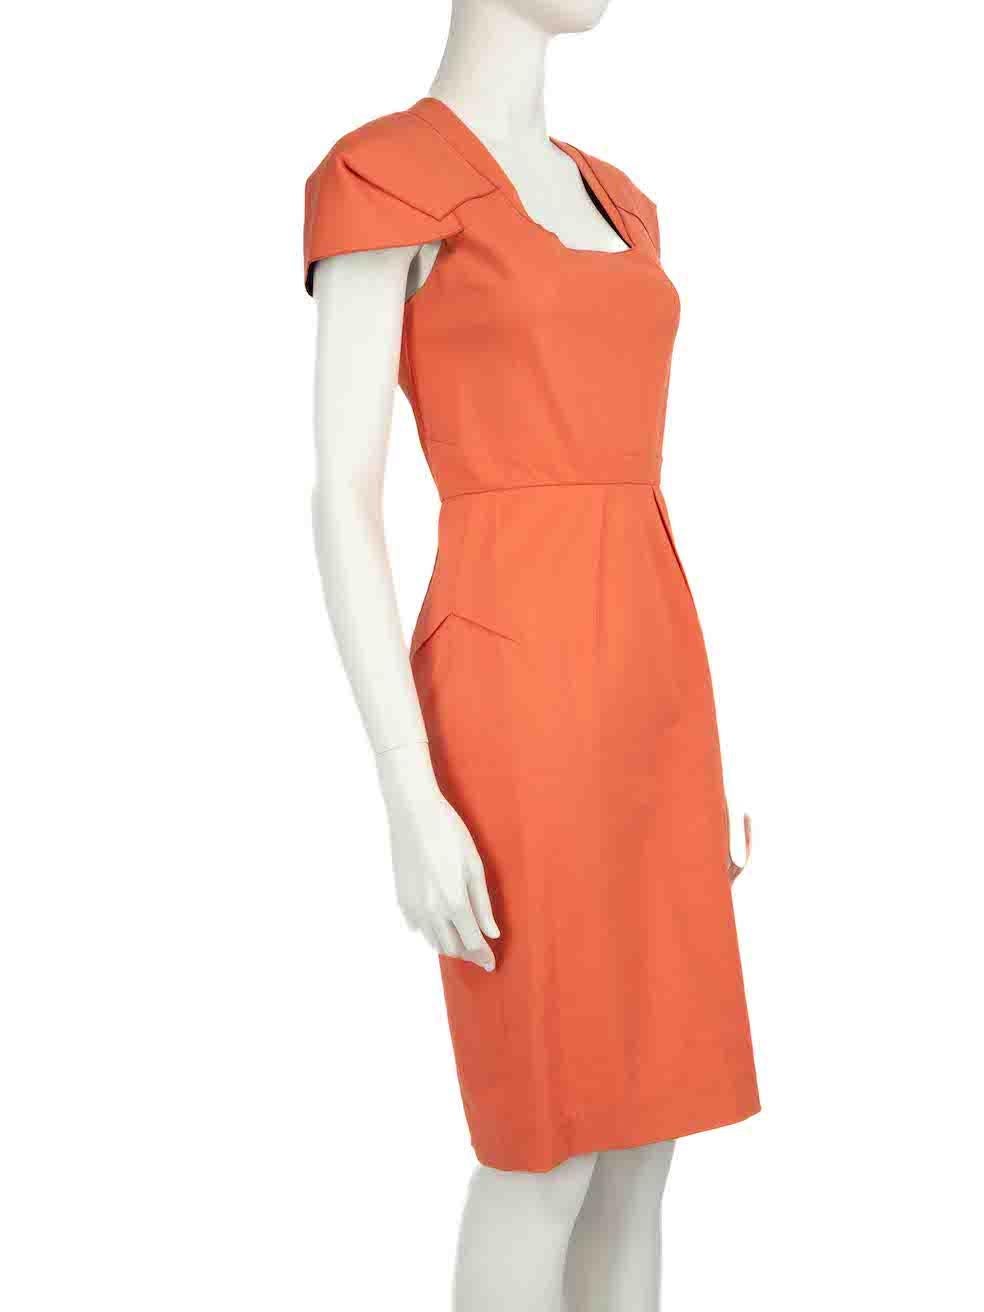 CONDITION is Very good. Minimal wear to dress is evident. Minimal wear to the front with plucks to the weave on this used Roland Mouret designer resale item.
 
 
 
 Details
 
 
 Coral
 
 Cotton
 
 Body con dress
 
 Geometric cut detail
 
 Square